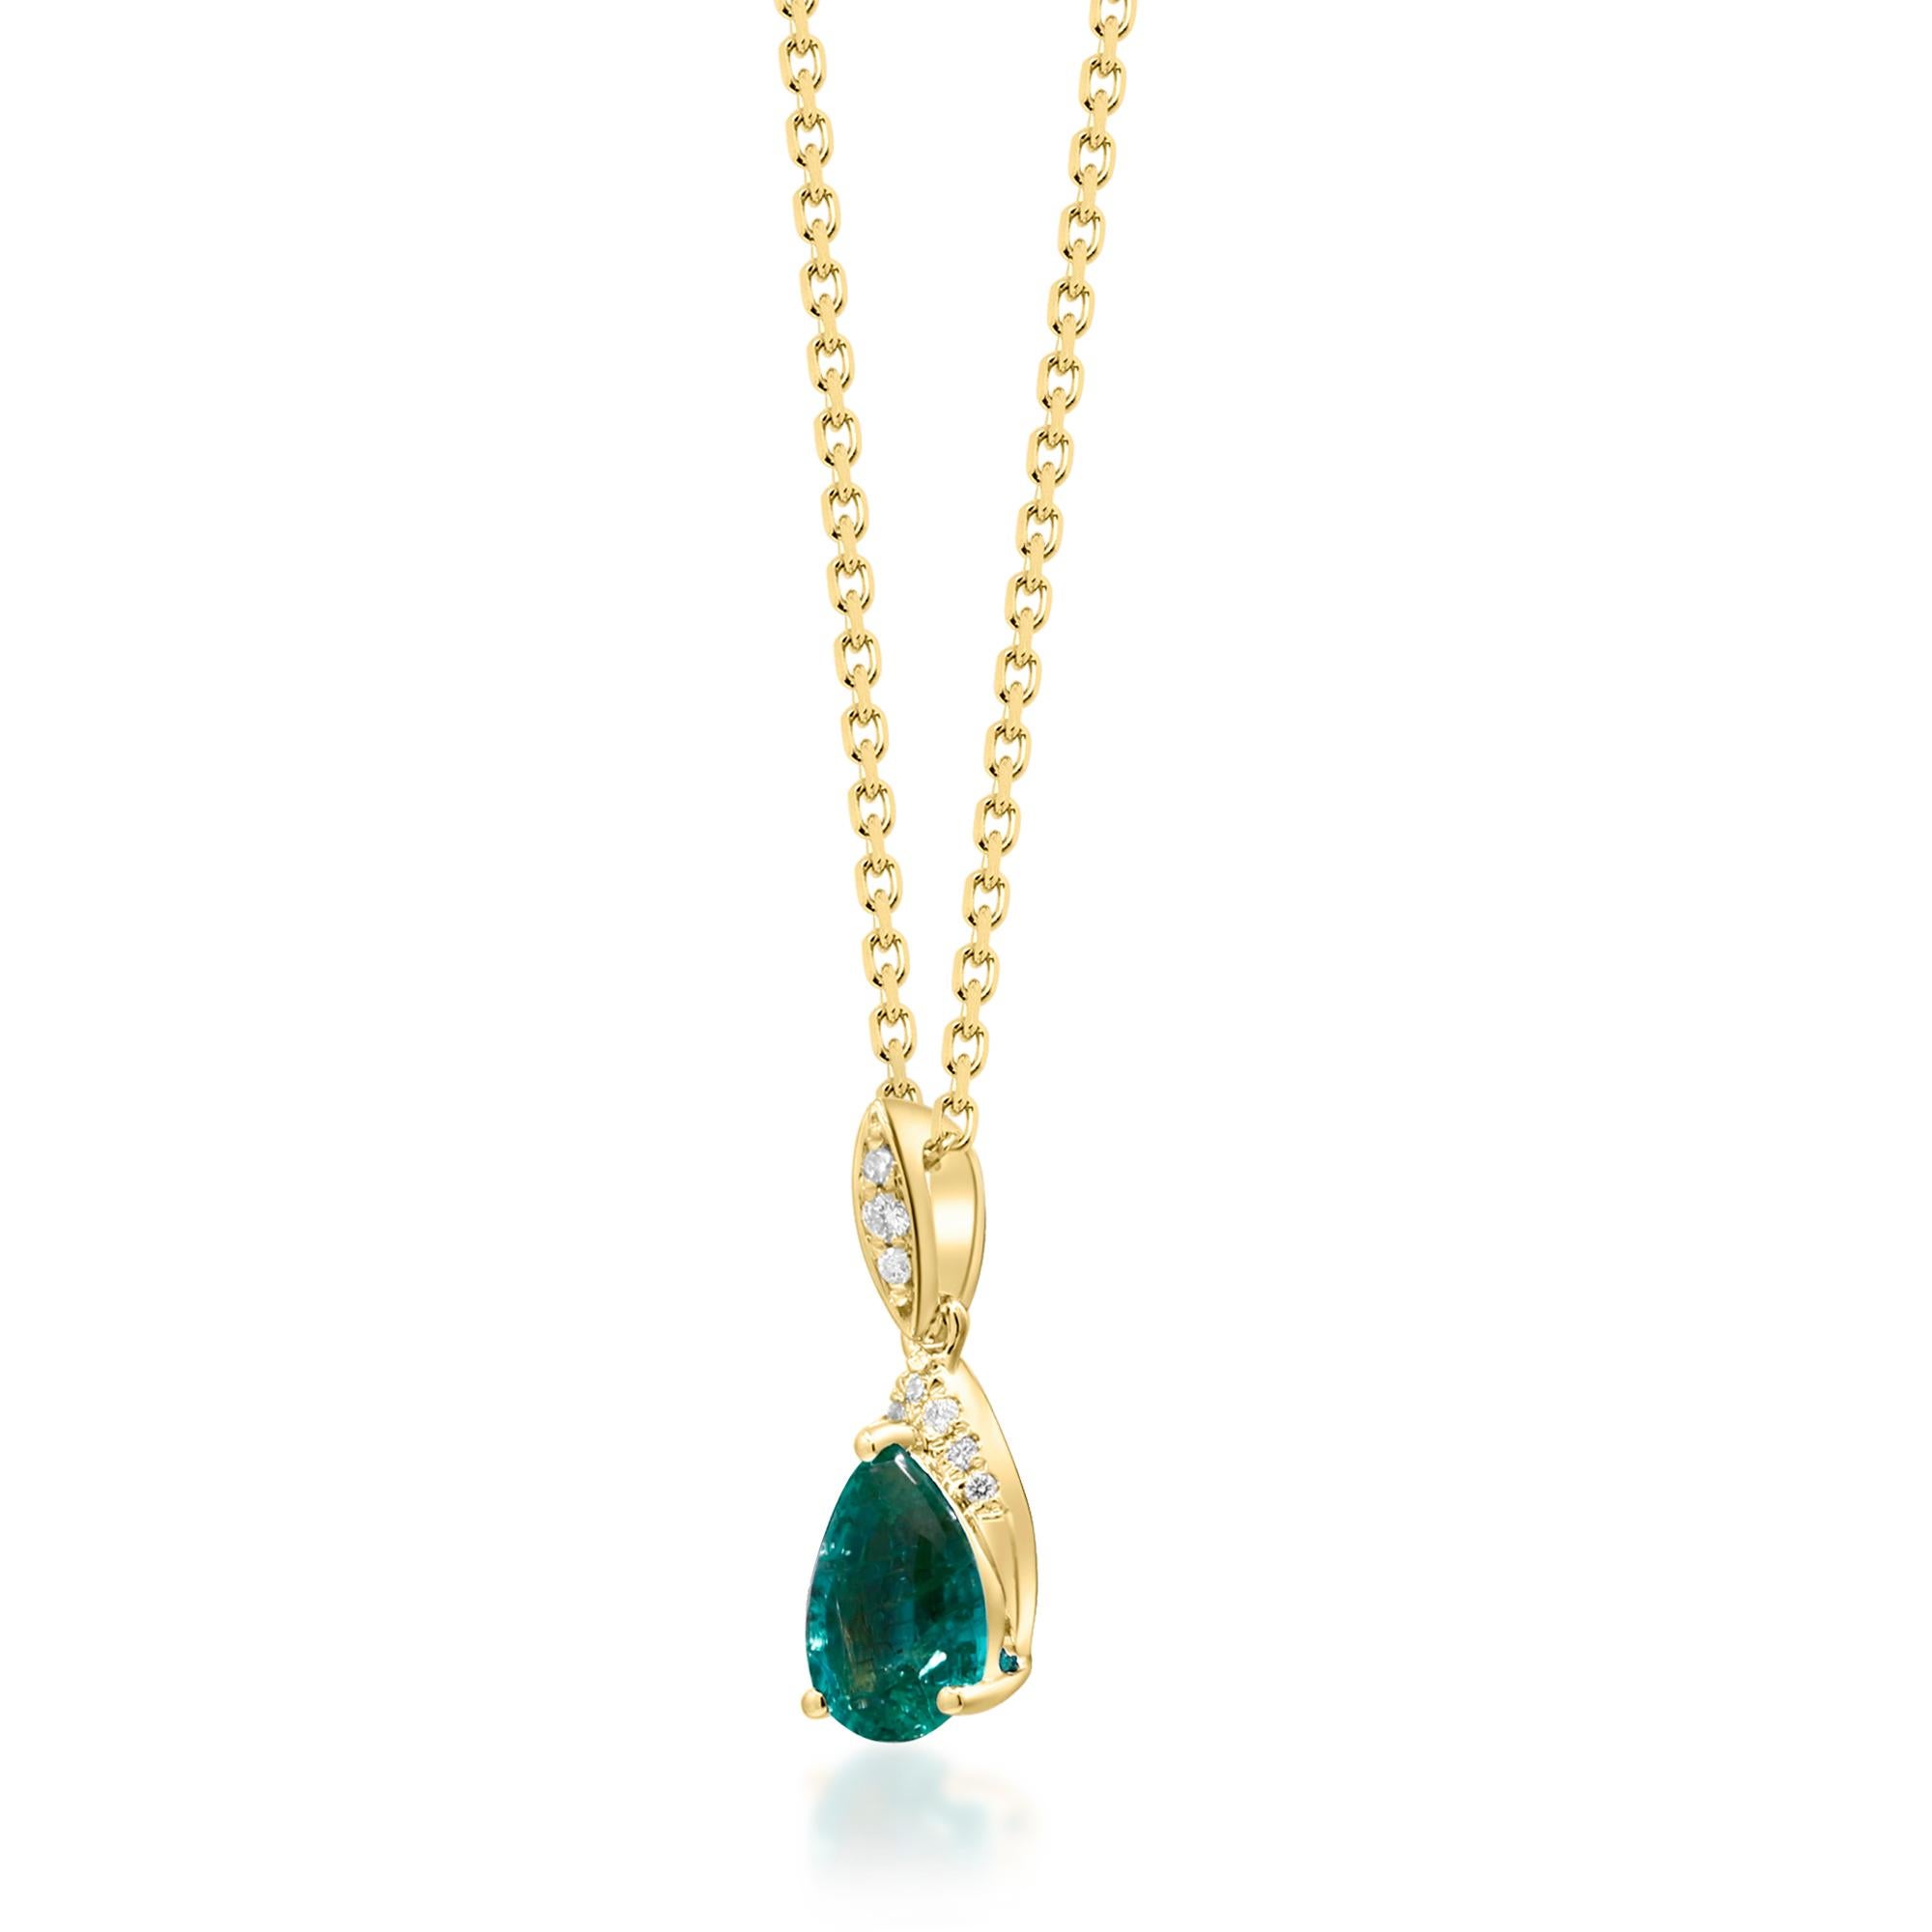 Art Deco 0.64 Carat Pear-Cut Emerald with Diamond Accents 10K Yellow Gold Pendant For Sale